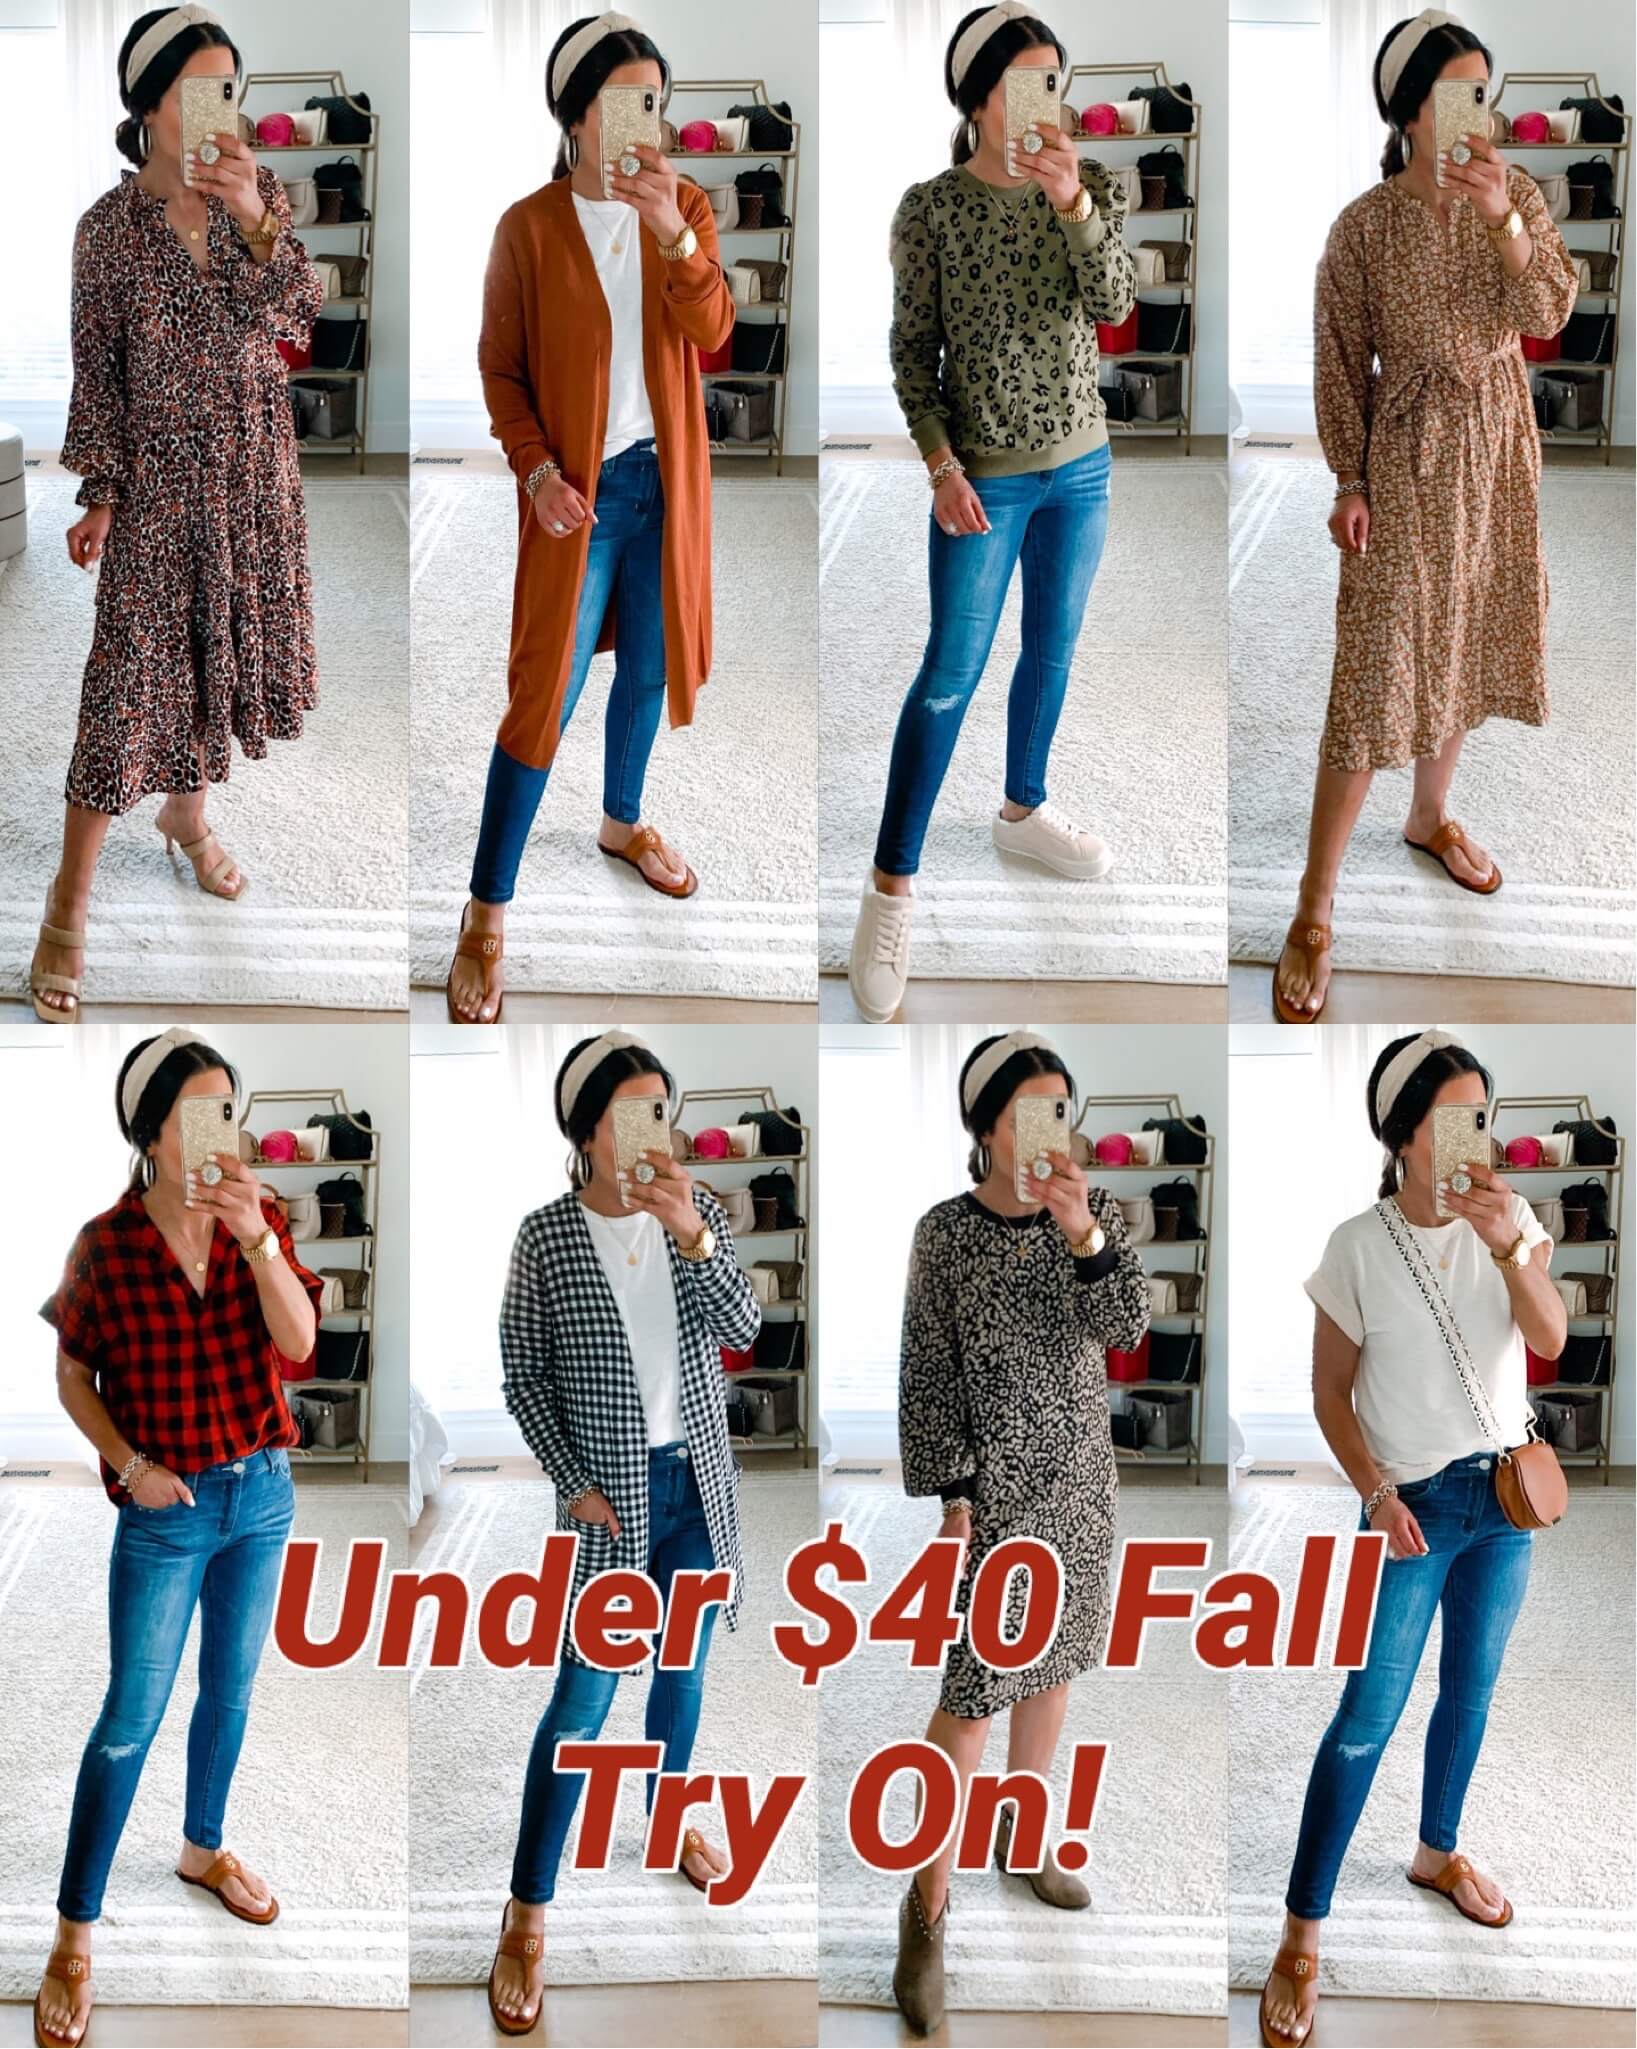 Walmart Wednesday Fall Fashion Try On! - The Double Take Girls